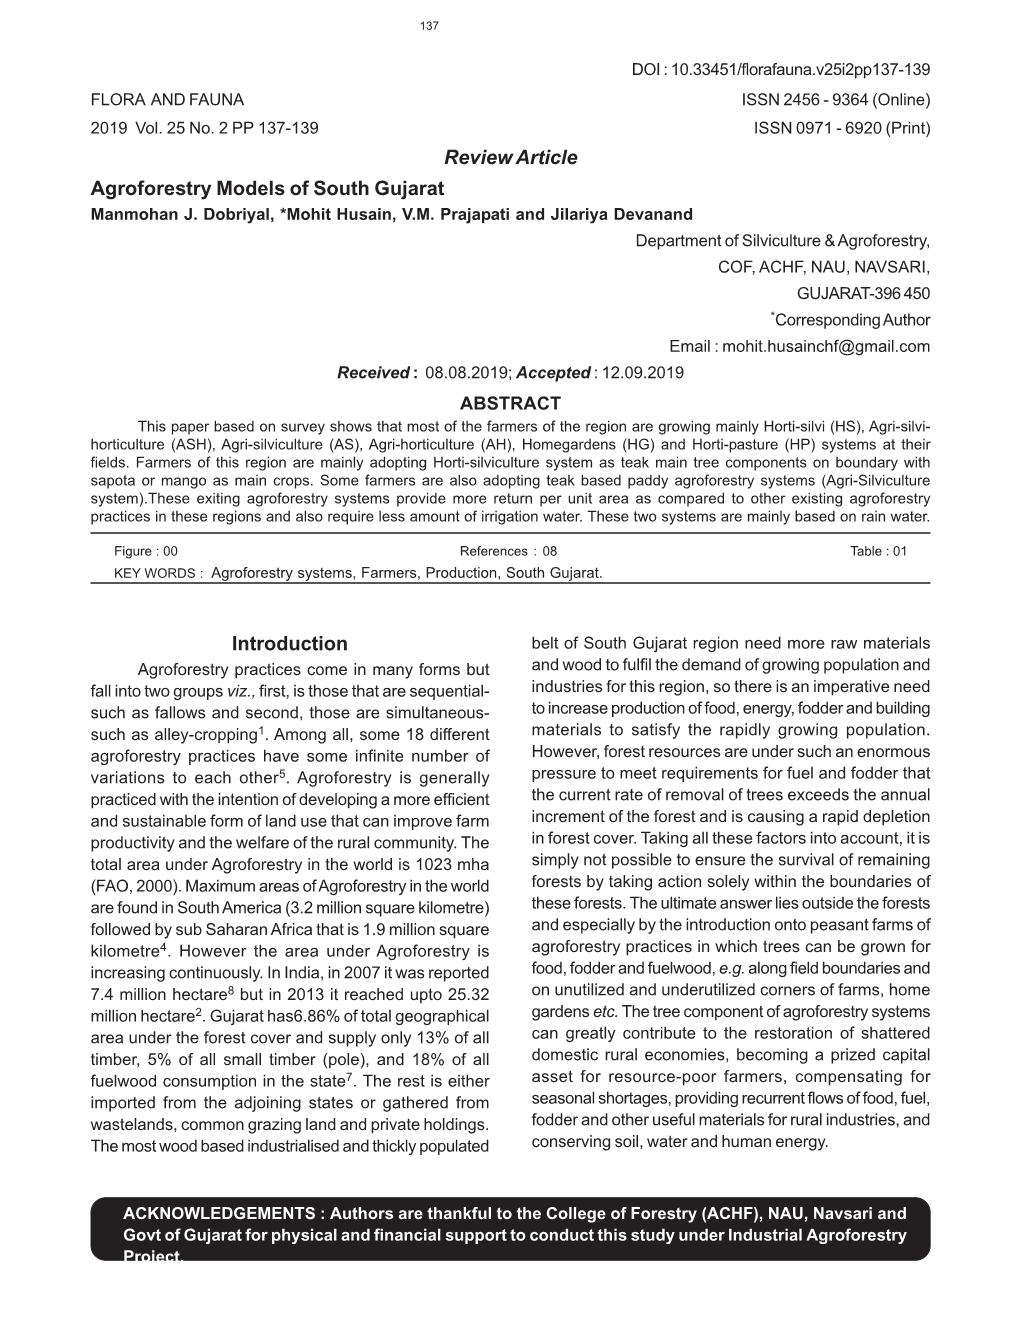 Review Article Agroforestry Models of South Gujarat Introduction